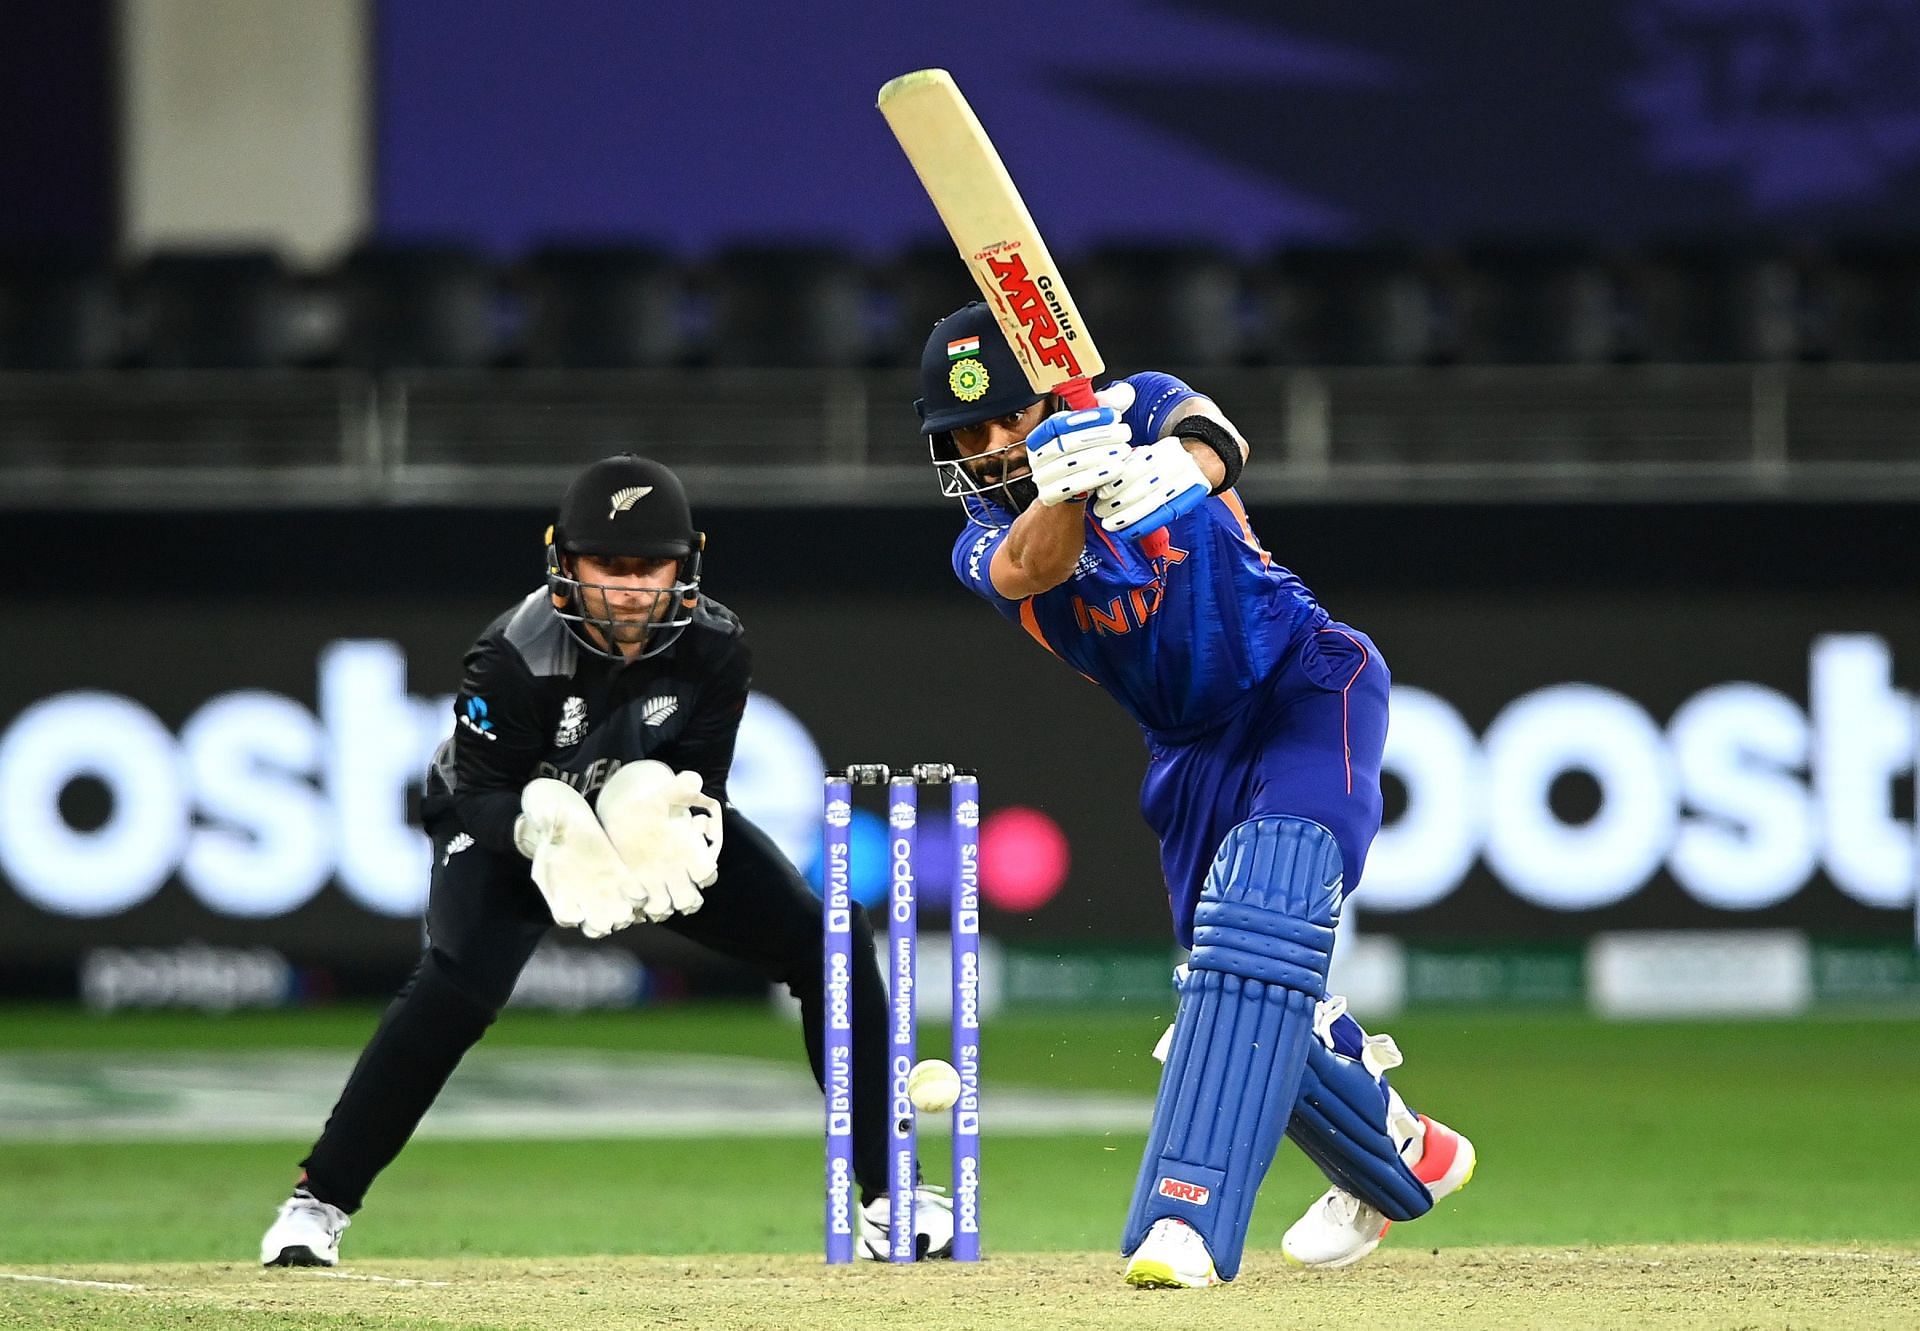 The batter in action during the T20 World Cup. Pic: Getty Images